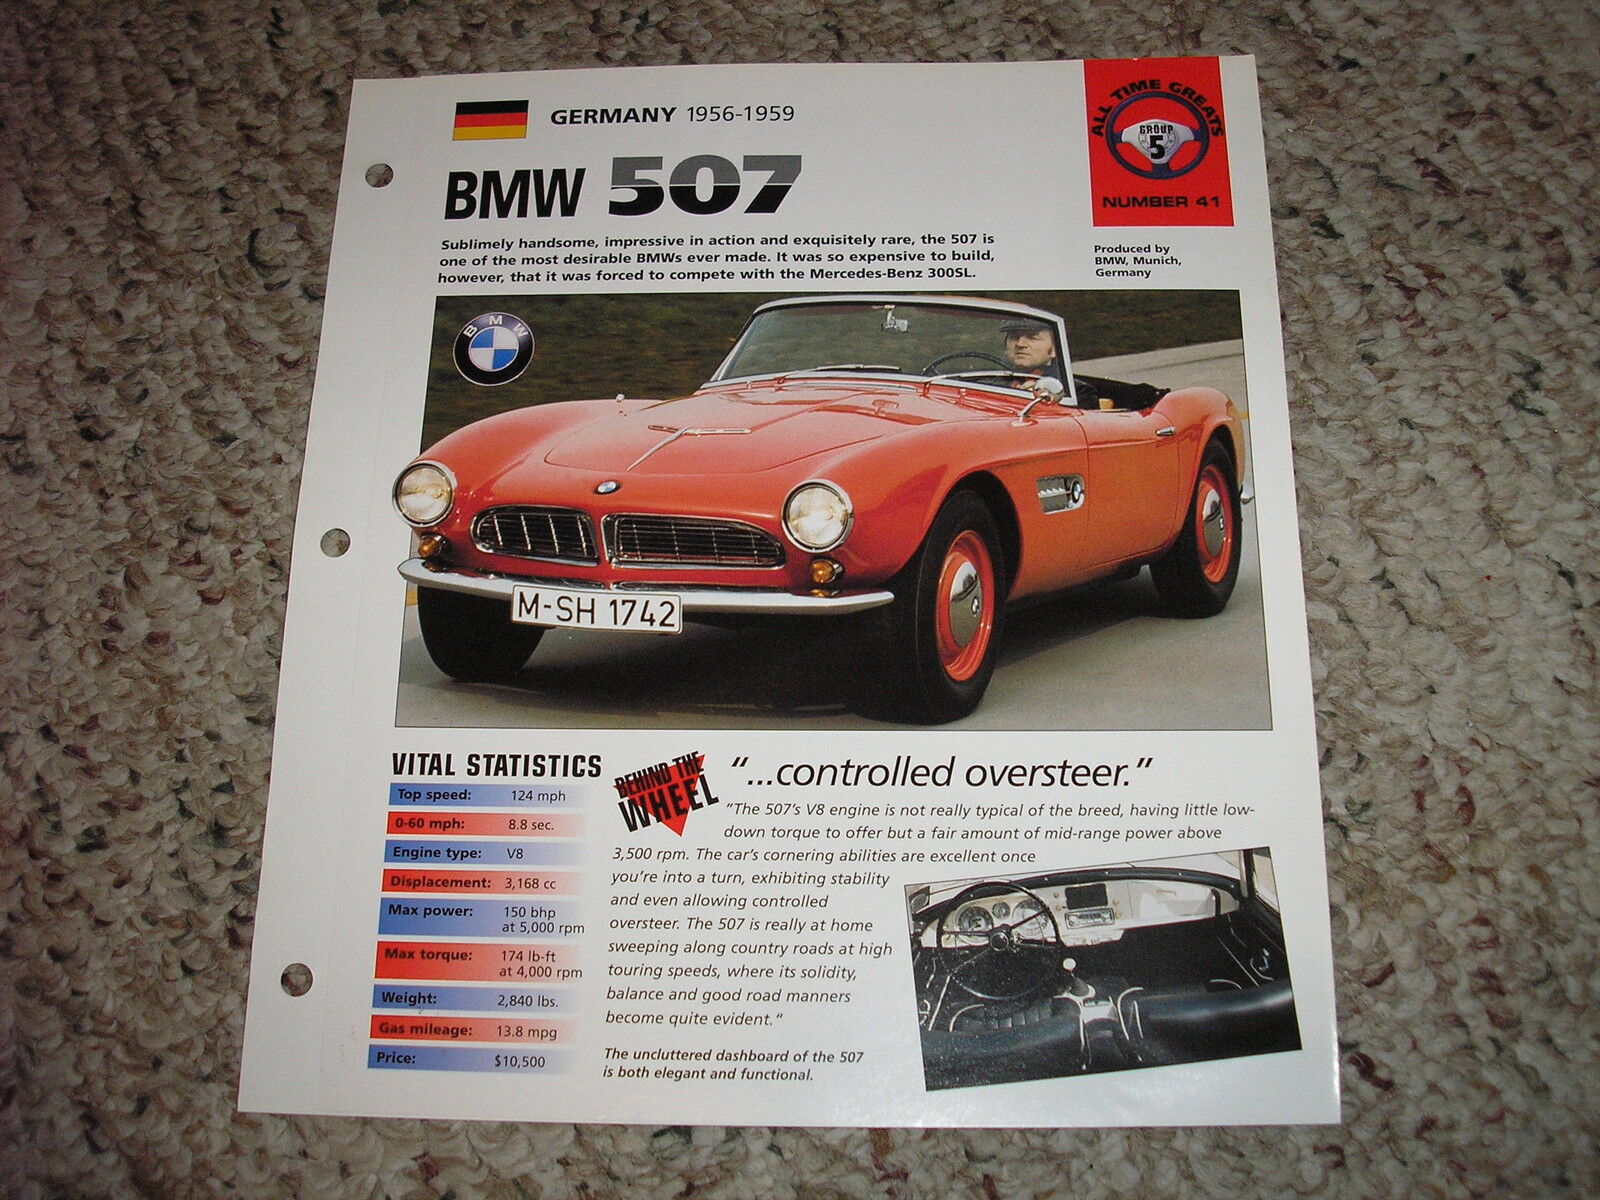 Germany 1956-1959 BMW 507 Hot Cars All Time Greats GP 5 # 41 Spec Sheet Brochure